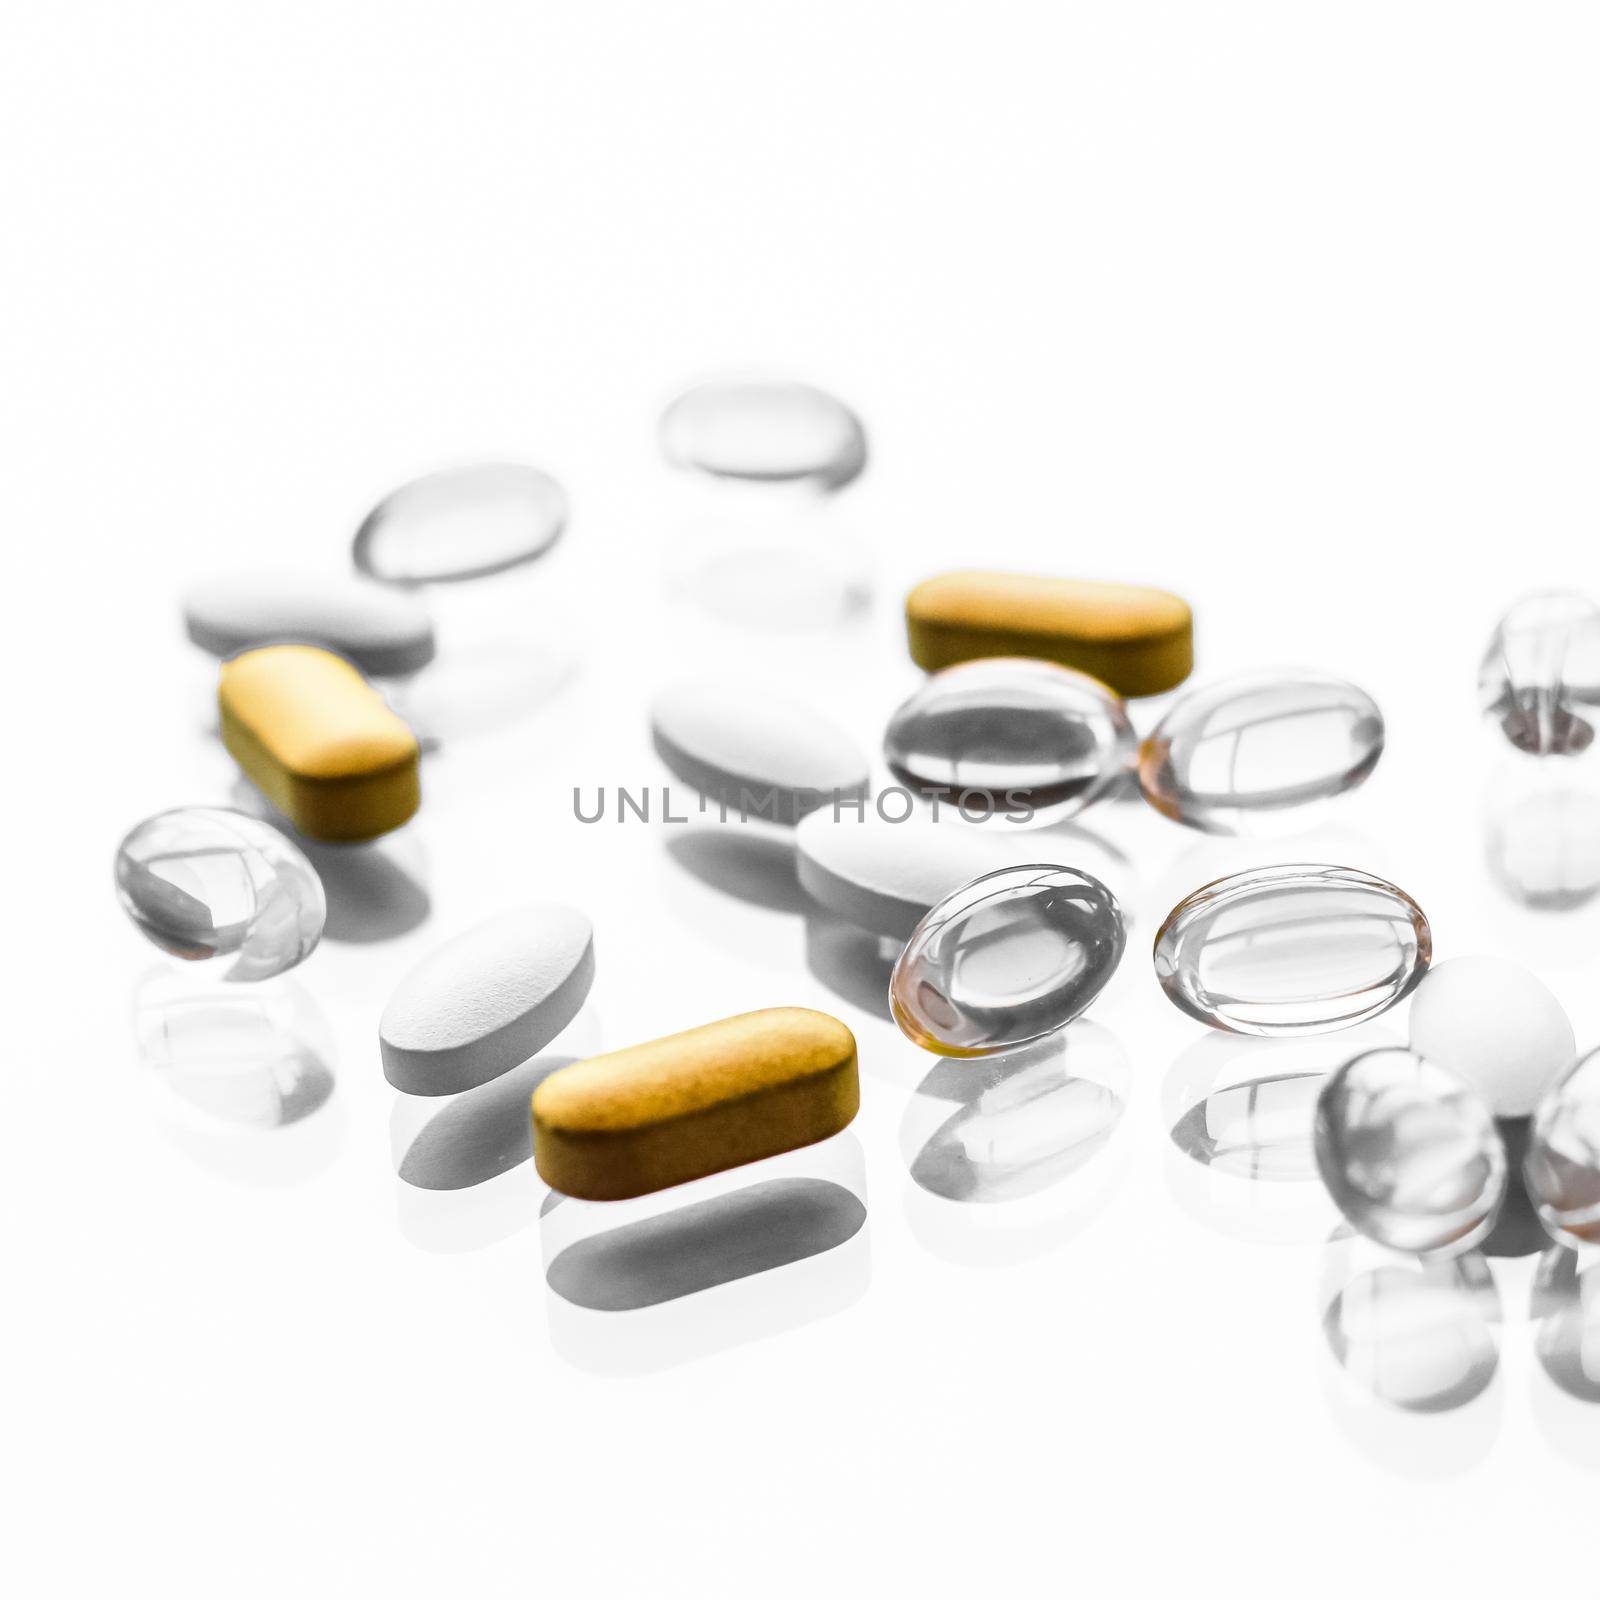 Pharma, branding and lab concept - Pills and capsules for diet nutrition, anti-aging beauty supplements, probiotic drugs, pill vitamins as medicine and healthcare cosmetics, pharmacy brand background